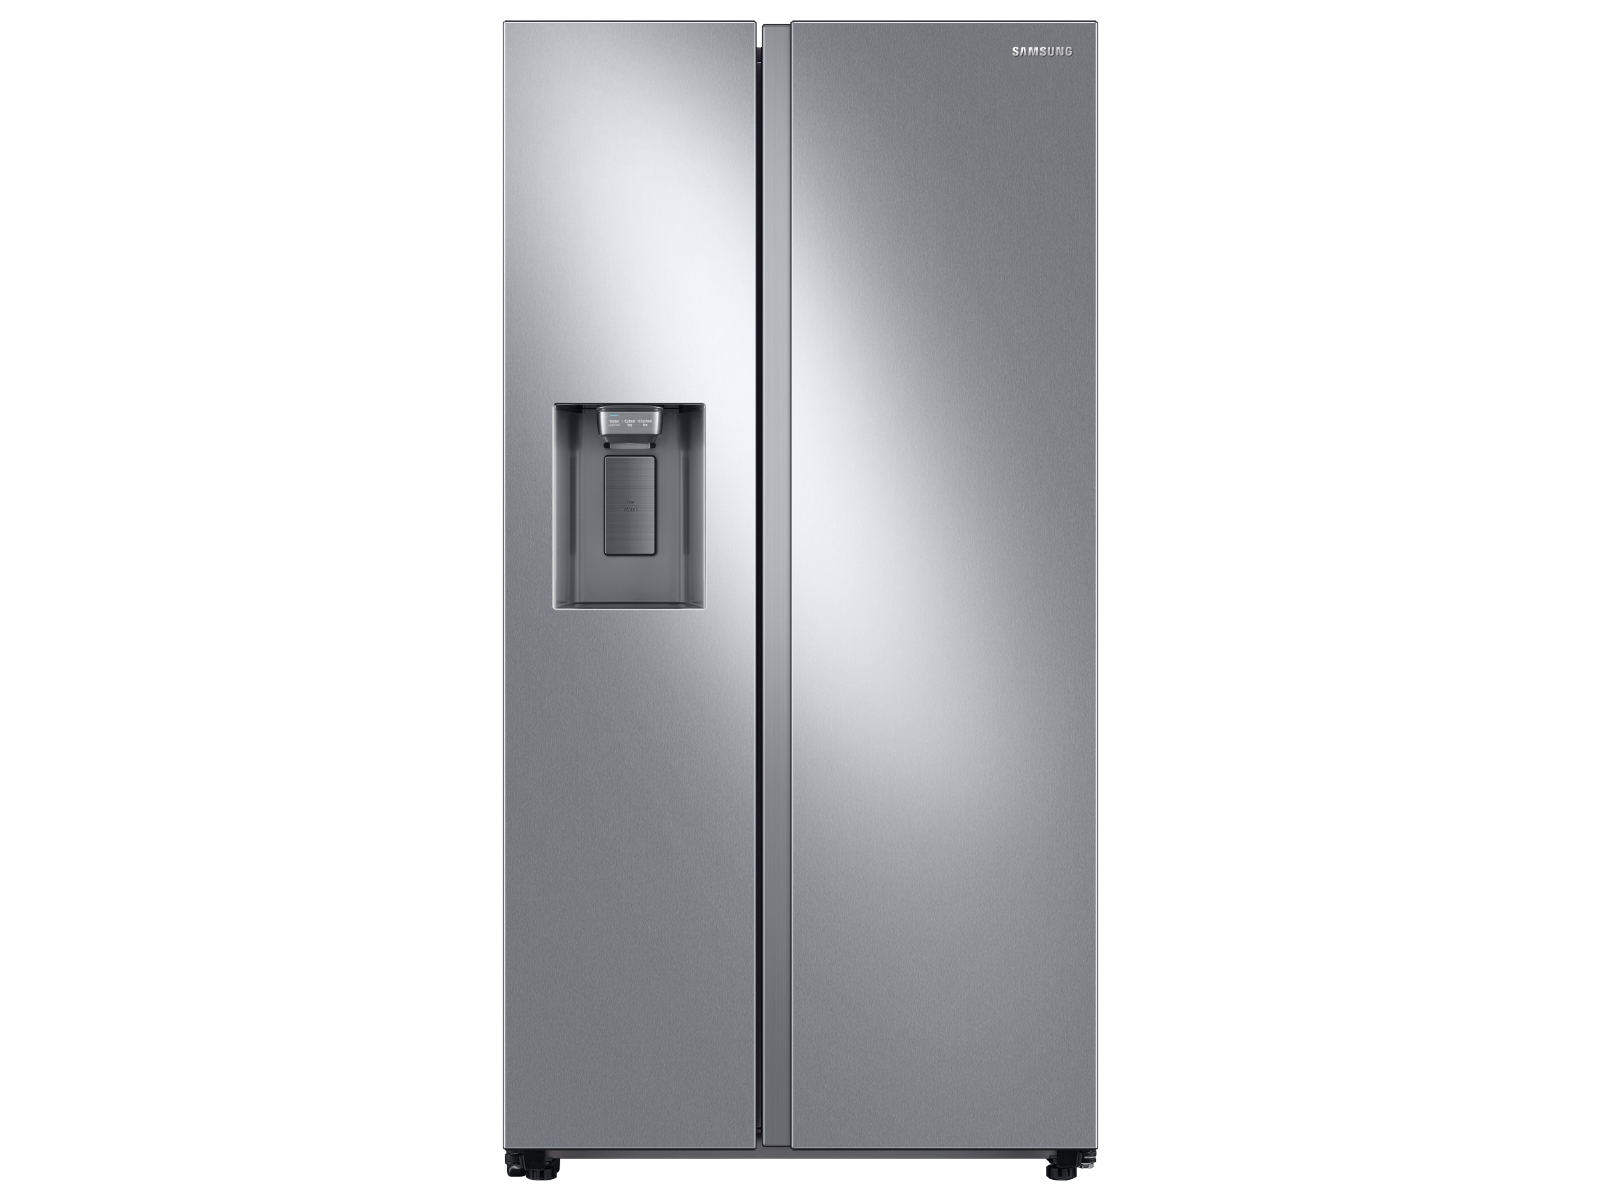 Photos - Fridge Samsung 27.4 cu. ft. Smart Side-by-Side Refrigerator with Large Capacity i 